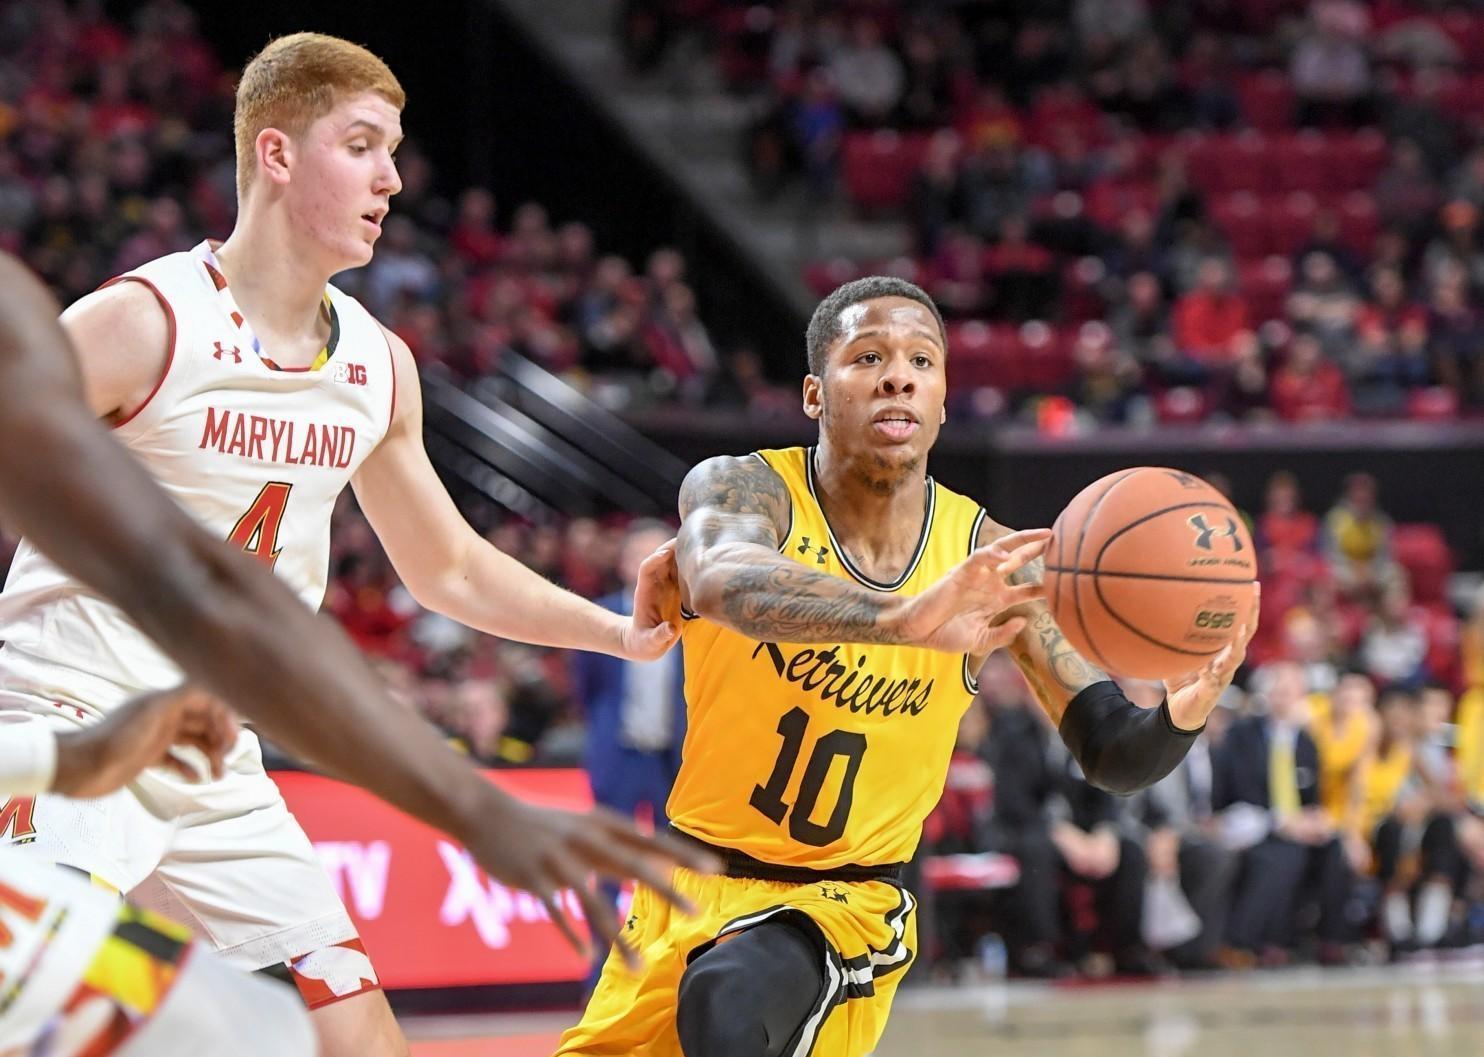 With Jackson shut down for season, Maryland overcomes first-half woes to beat UMBC, 66-45